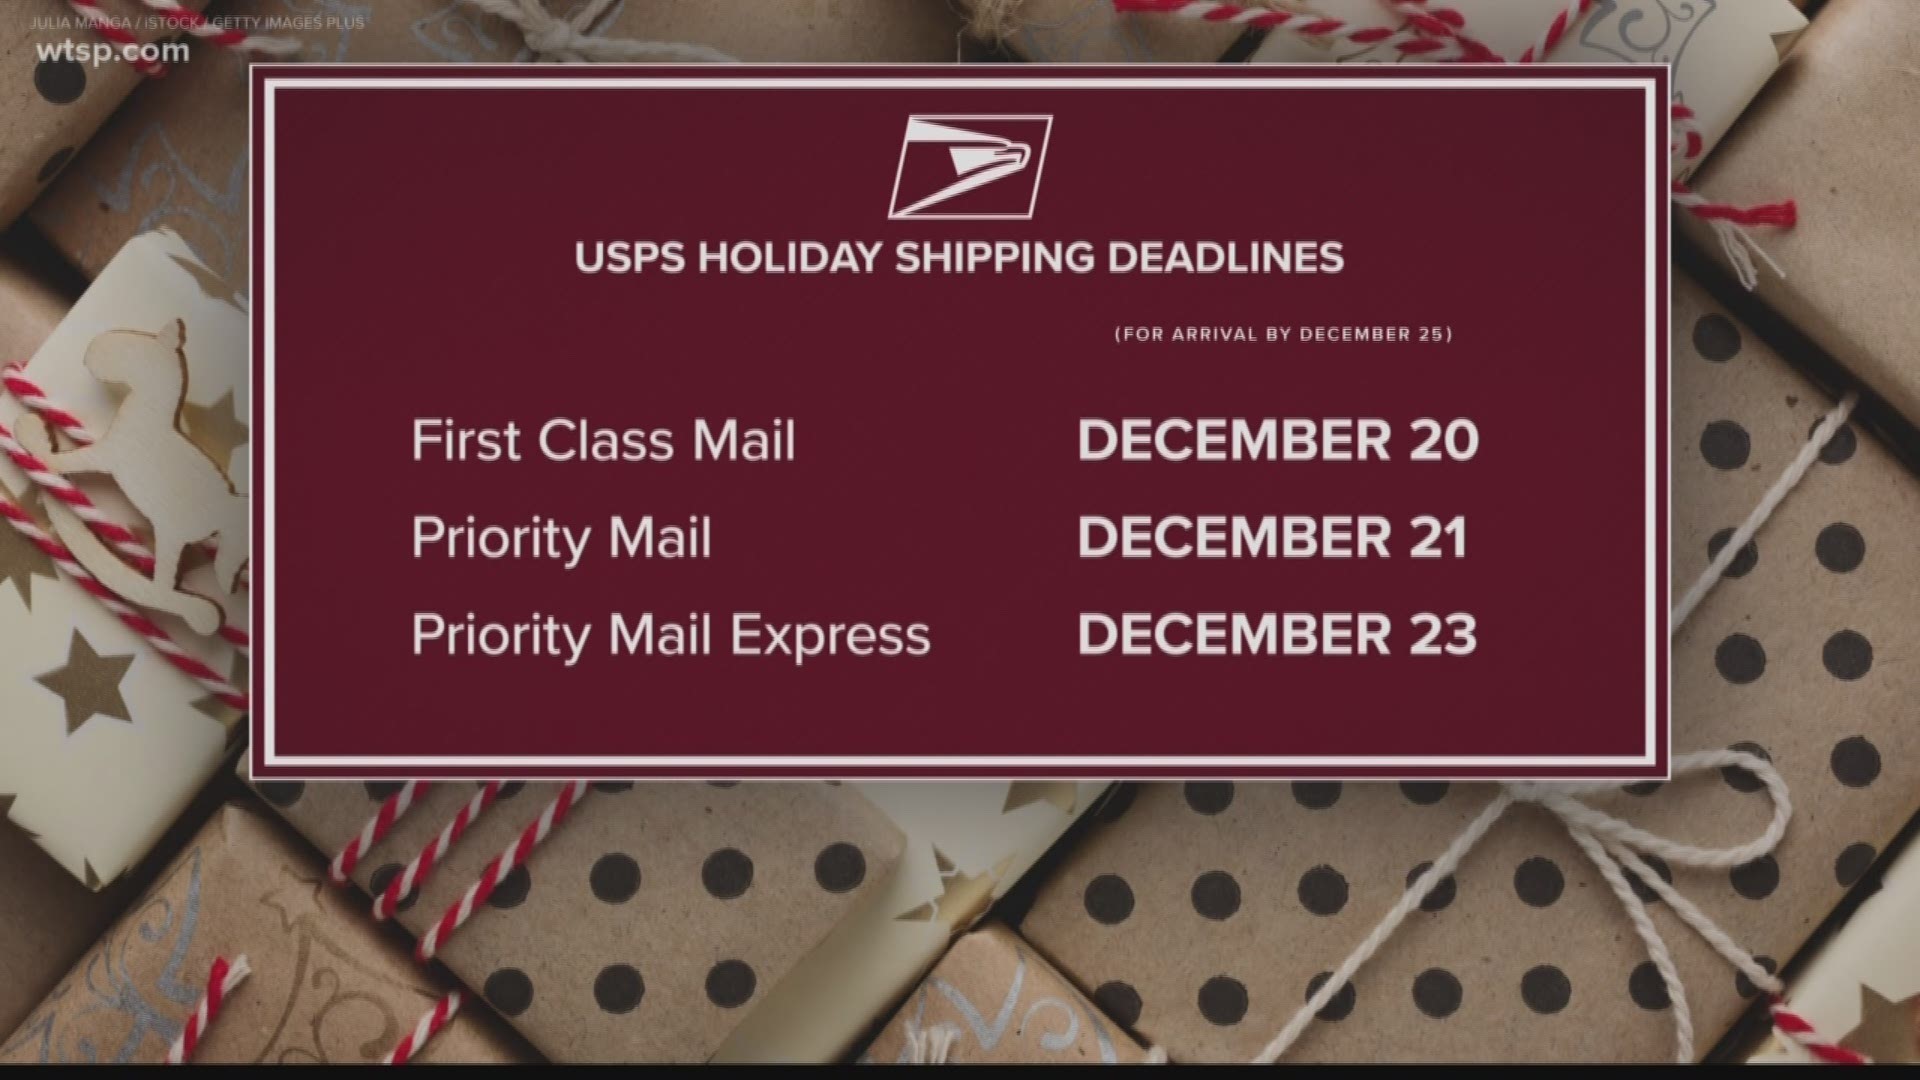 10News reporter Thuy Lan Nguyen has more on holiday shipping deadlines.